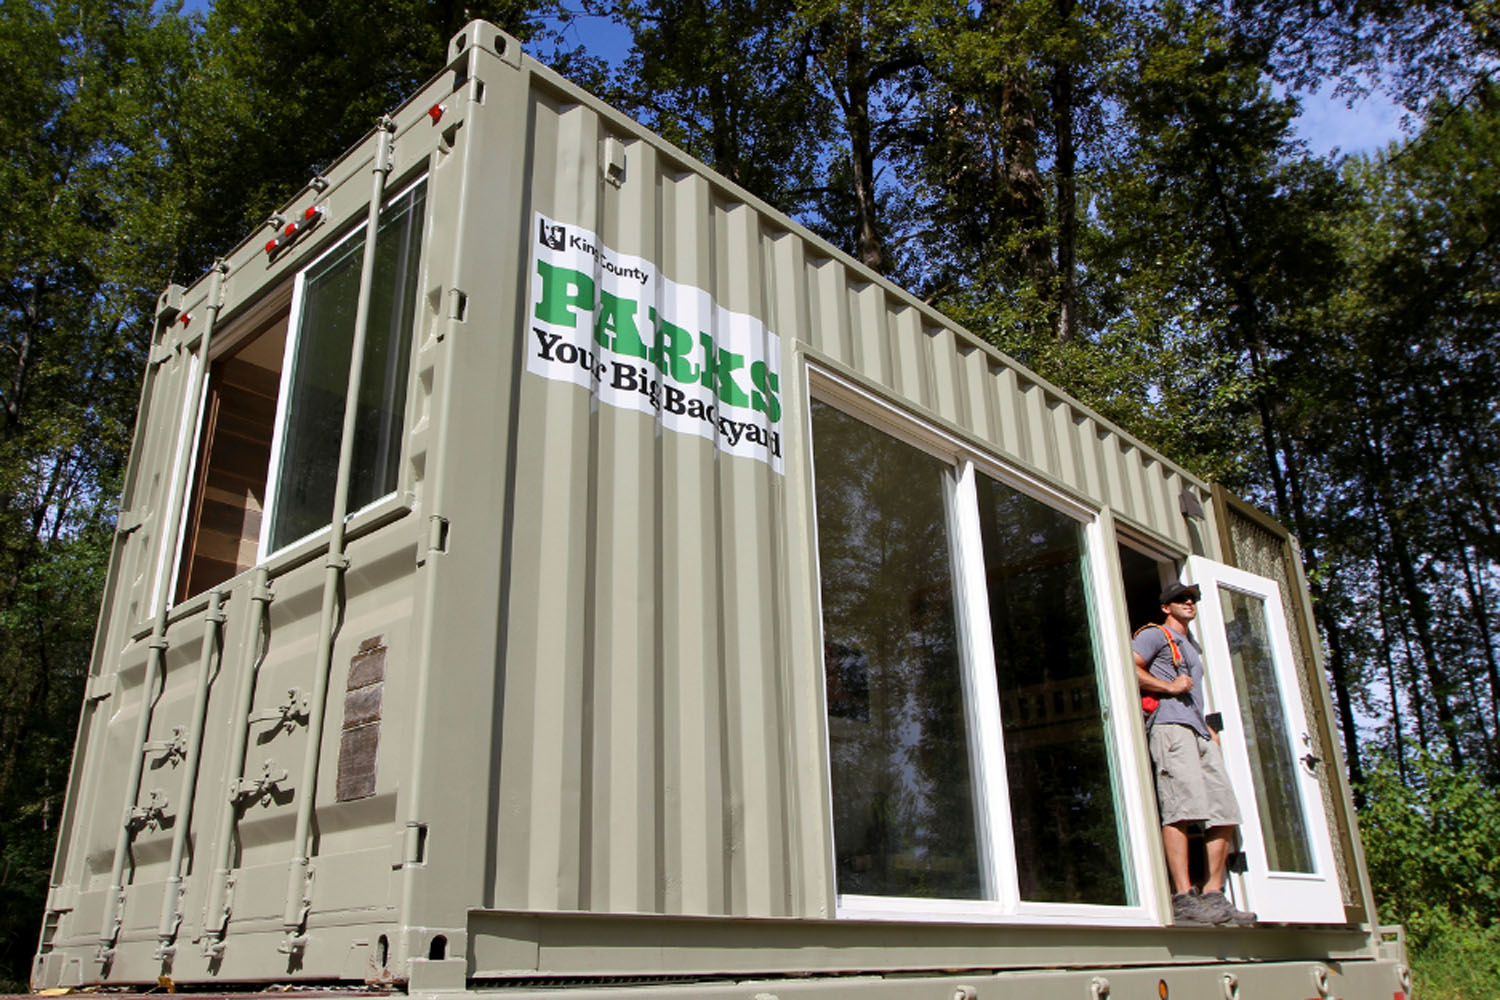 Former cargo container ready for campers - seattlepi.com1500 x 1000